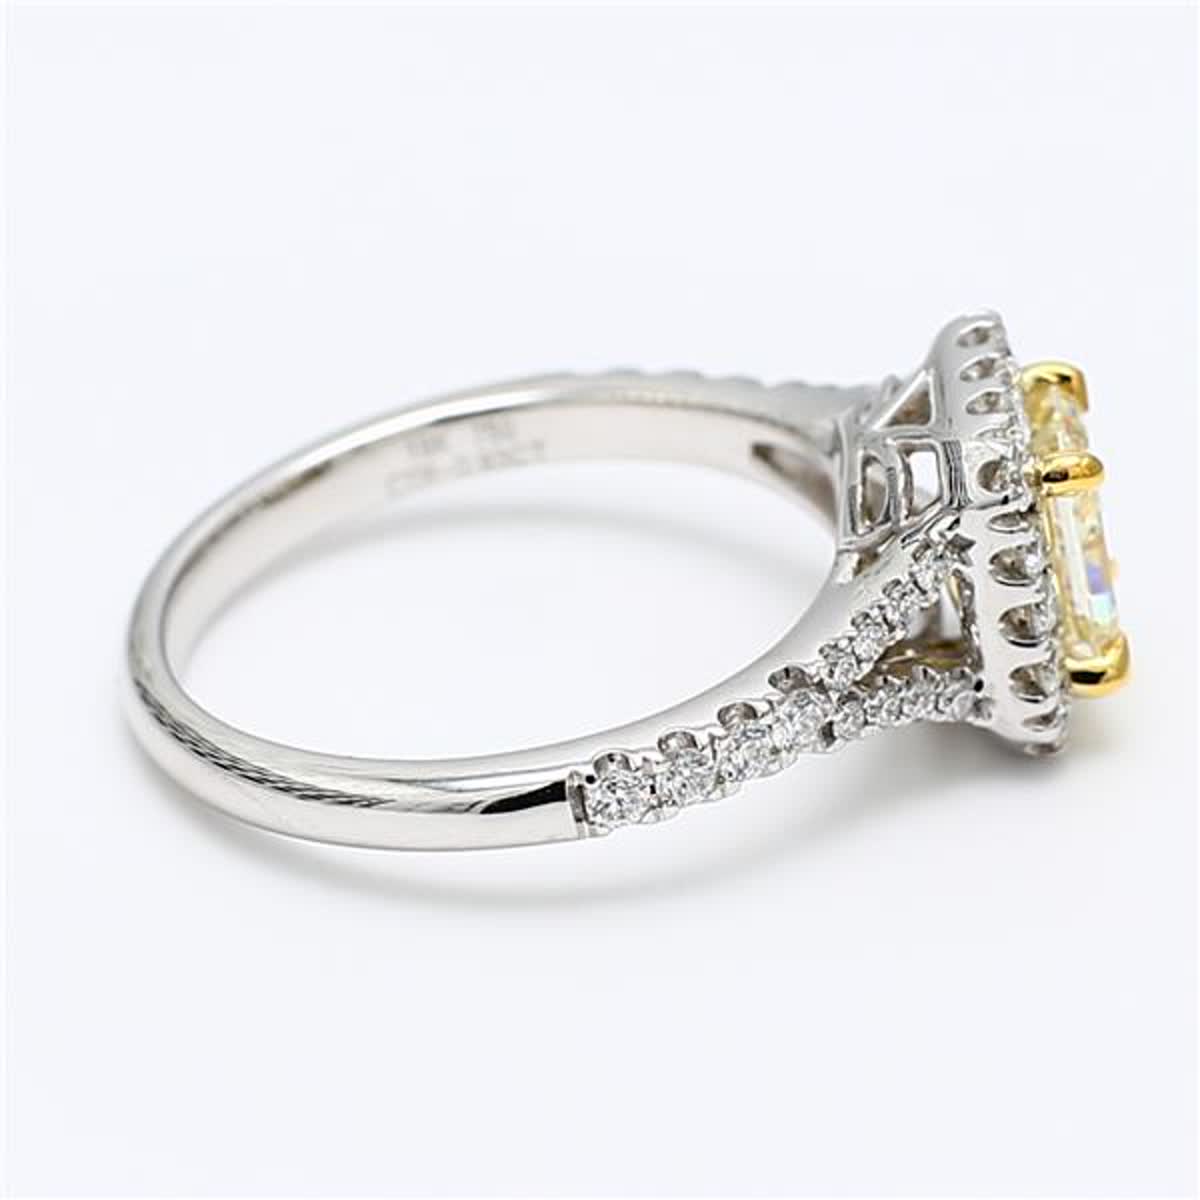 GIA Certified Natural Yellow Radiant and White Diamond 1.41 Carat TW Plat Ring